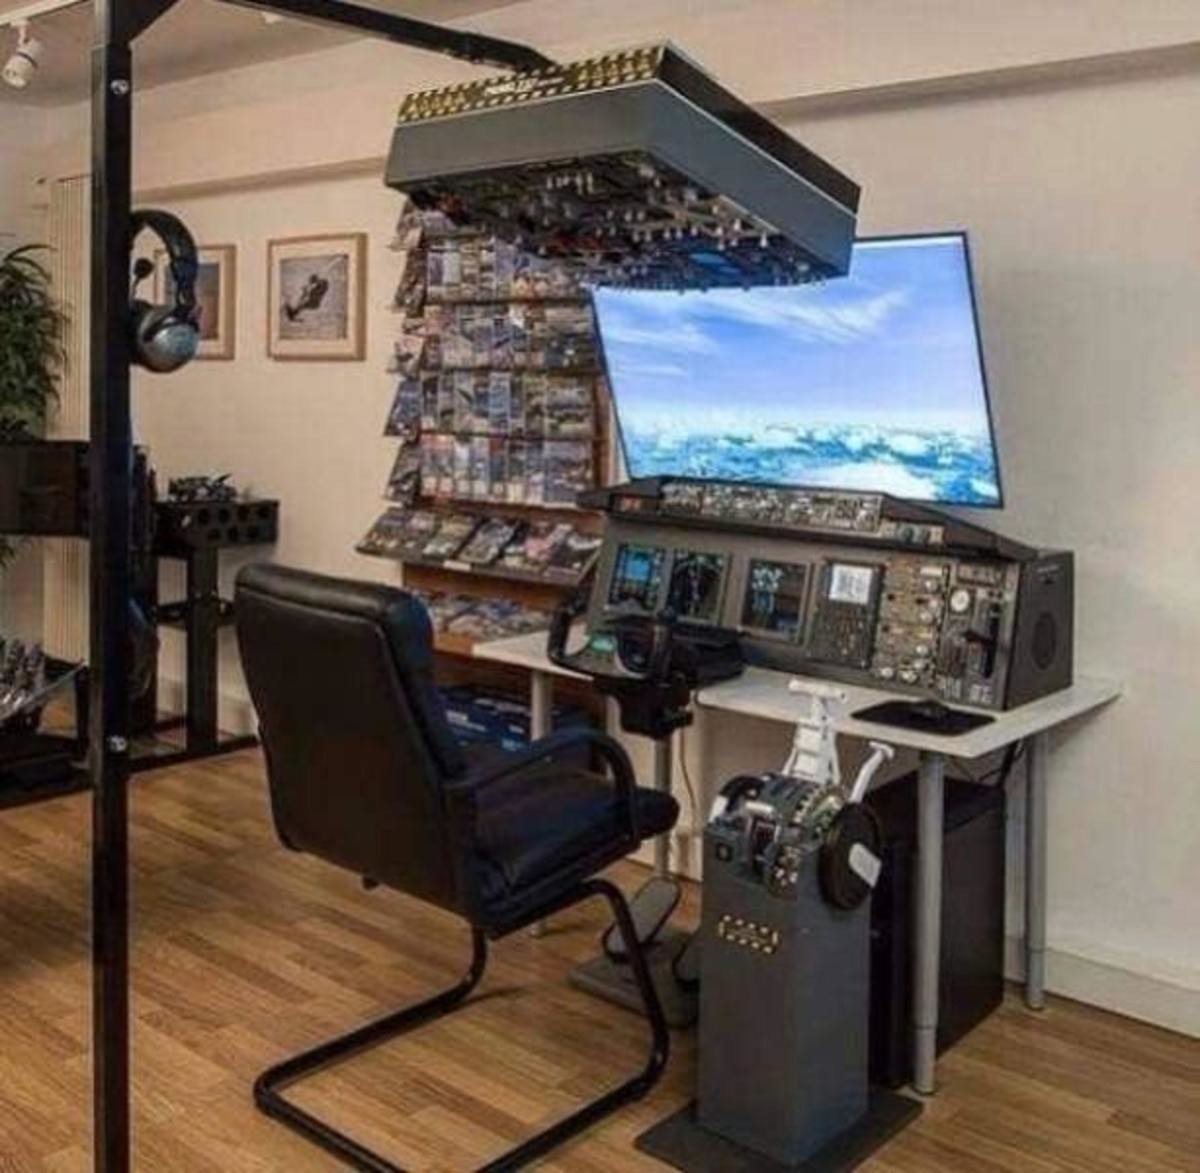 When you take flight sims too far.. join list: DailyVideoGameHumor (1519 subs)Mention History.. You throw like 2 more same sized monitors and you will never see me again. Id quit my job